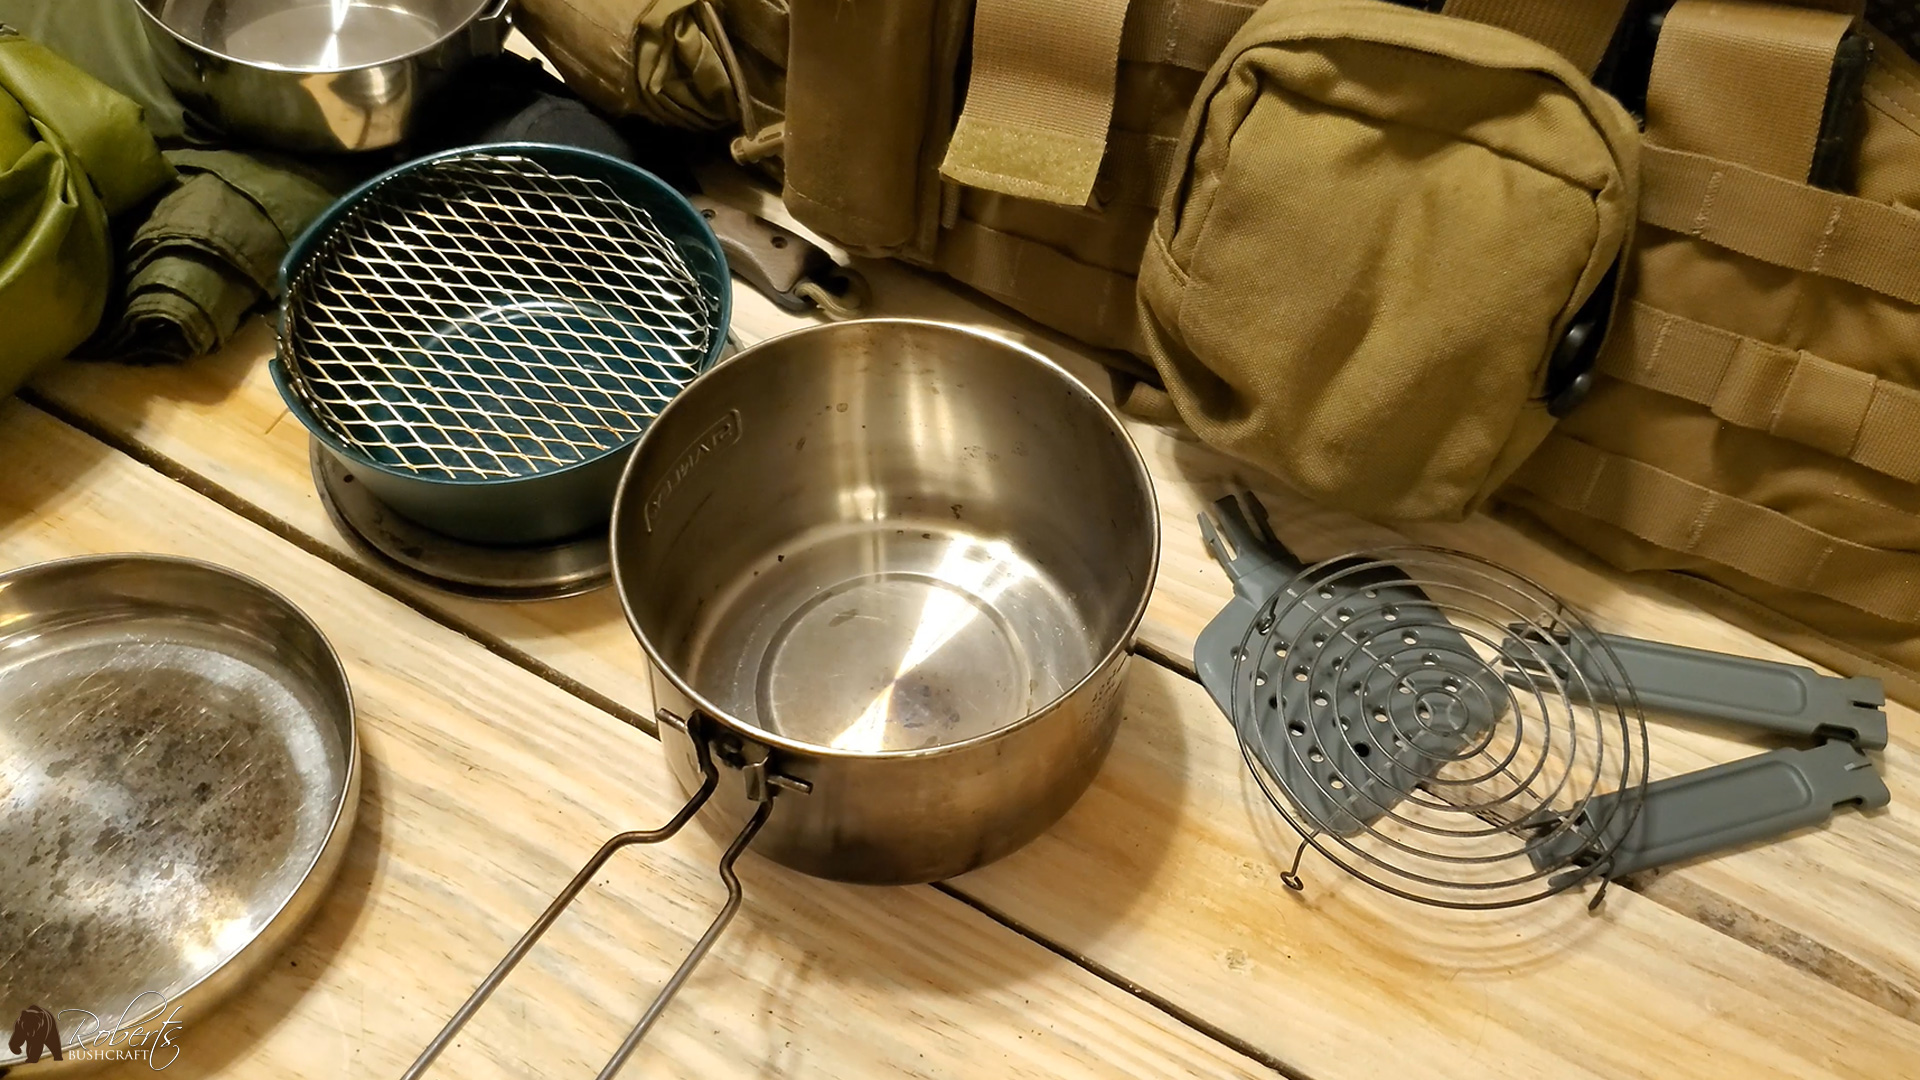 Secret weapon for baking in Stanley Adventure All-in-One Cookset